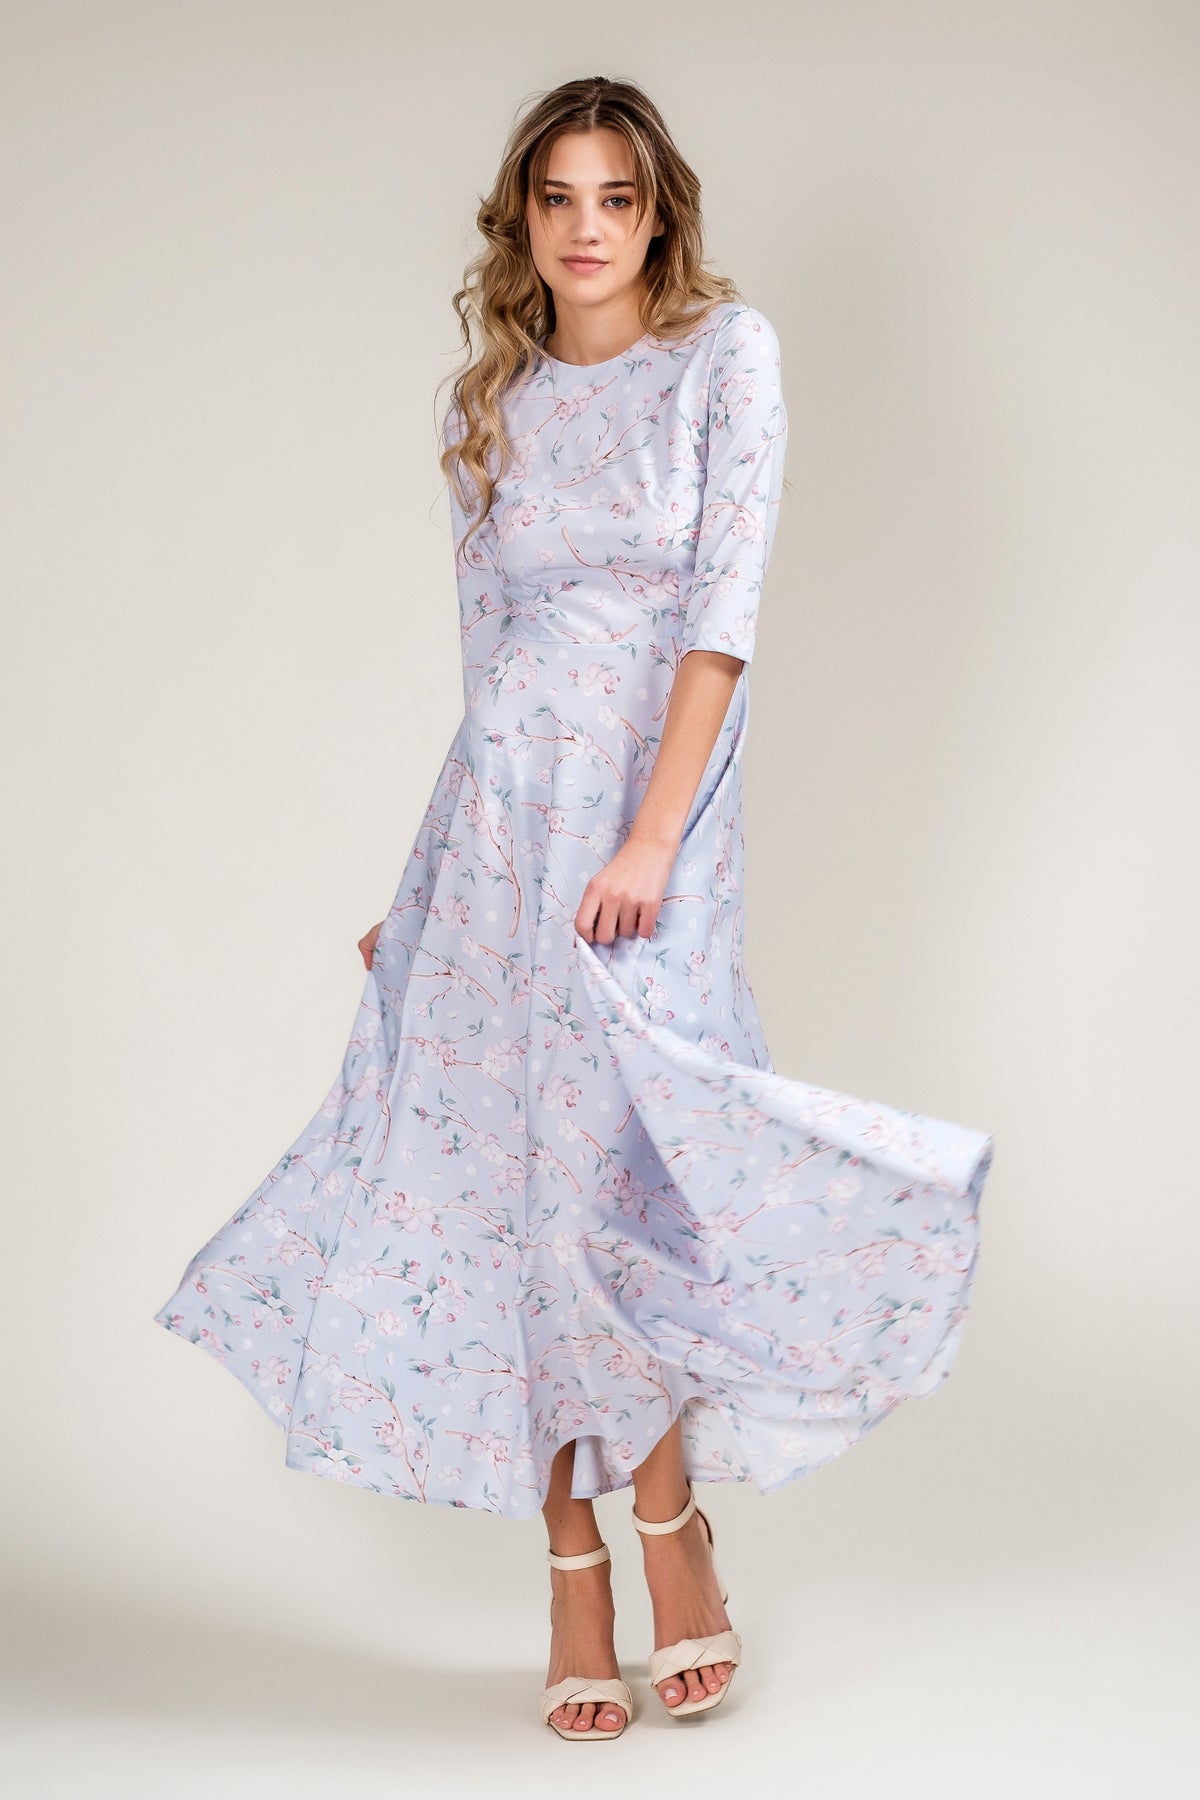 Classic dress with exclusive "Apple Blossom" print